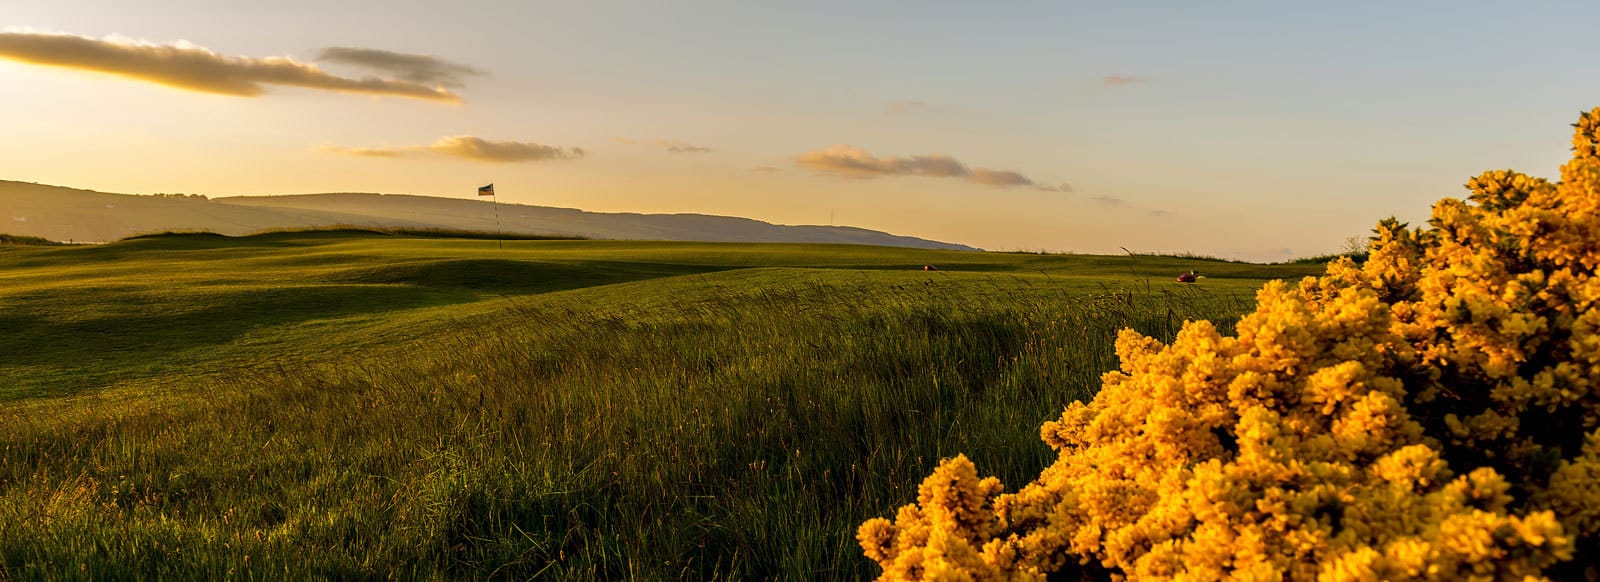 Image of the Fortrose and Rosemarkie golf Links, Inverness, Scotland